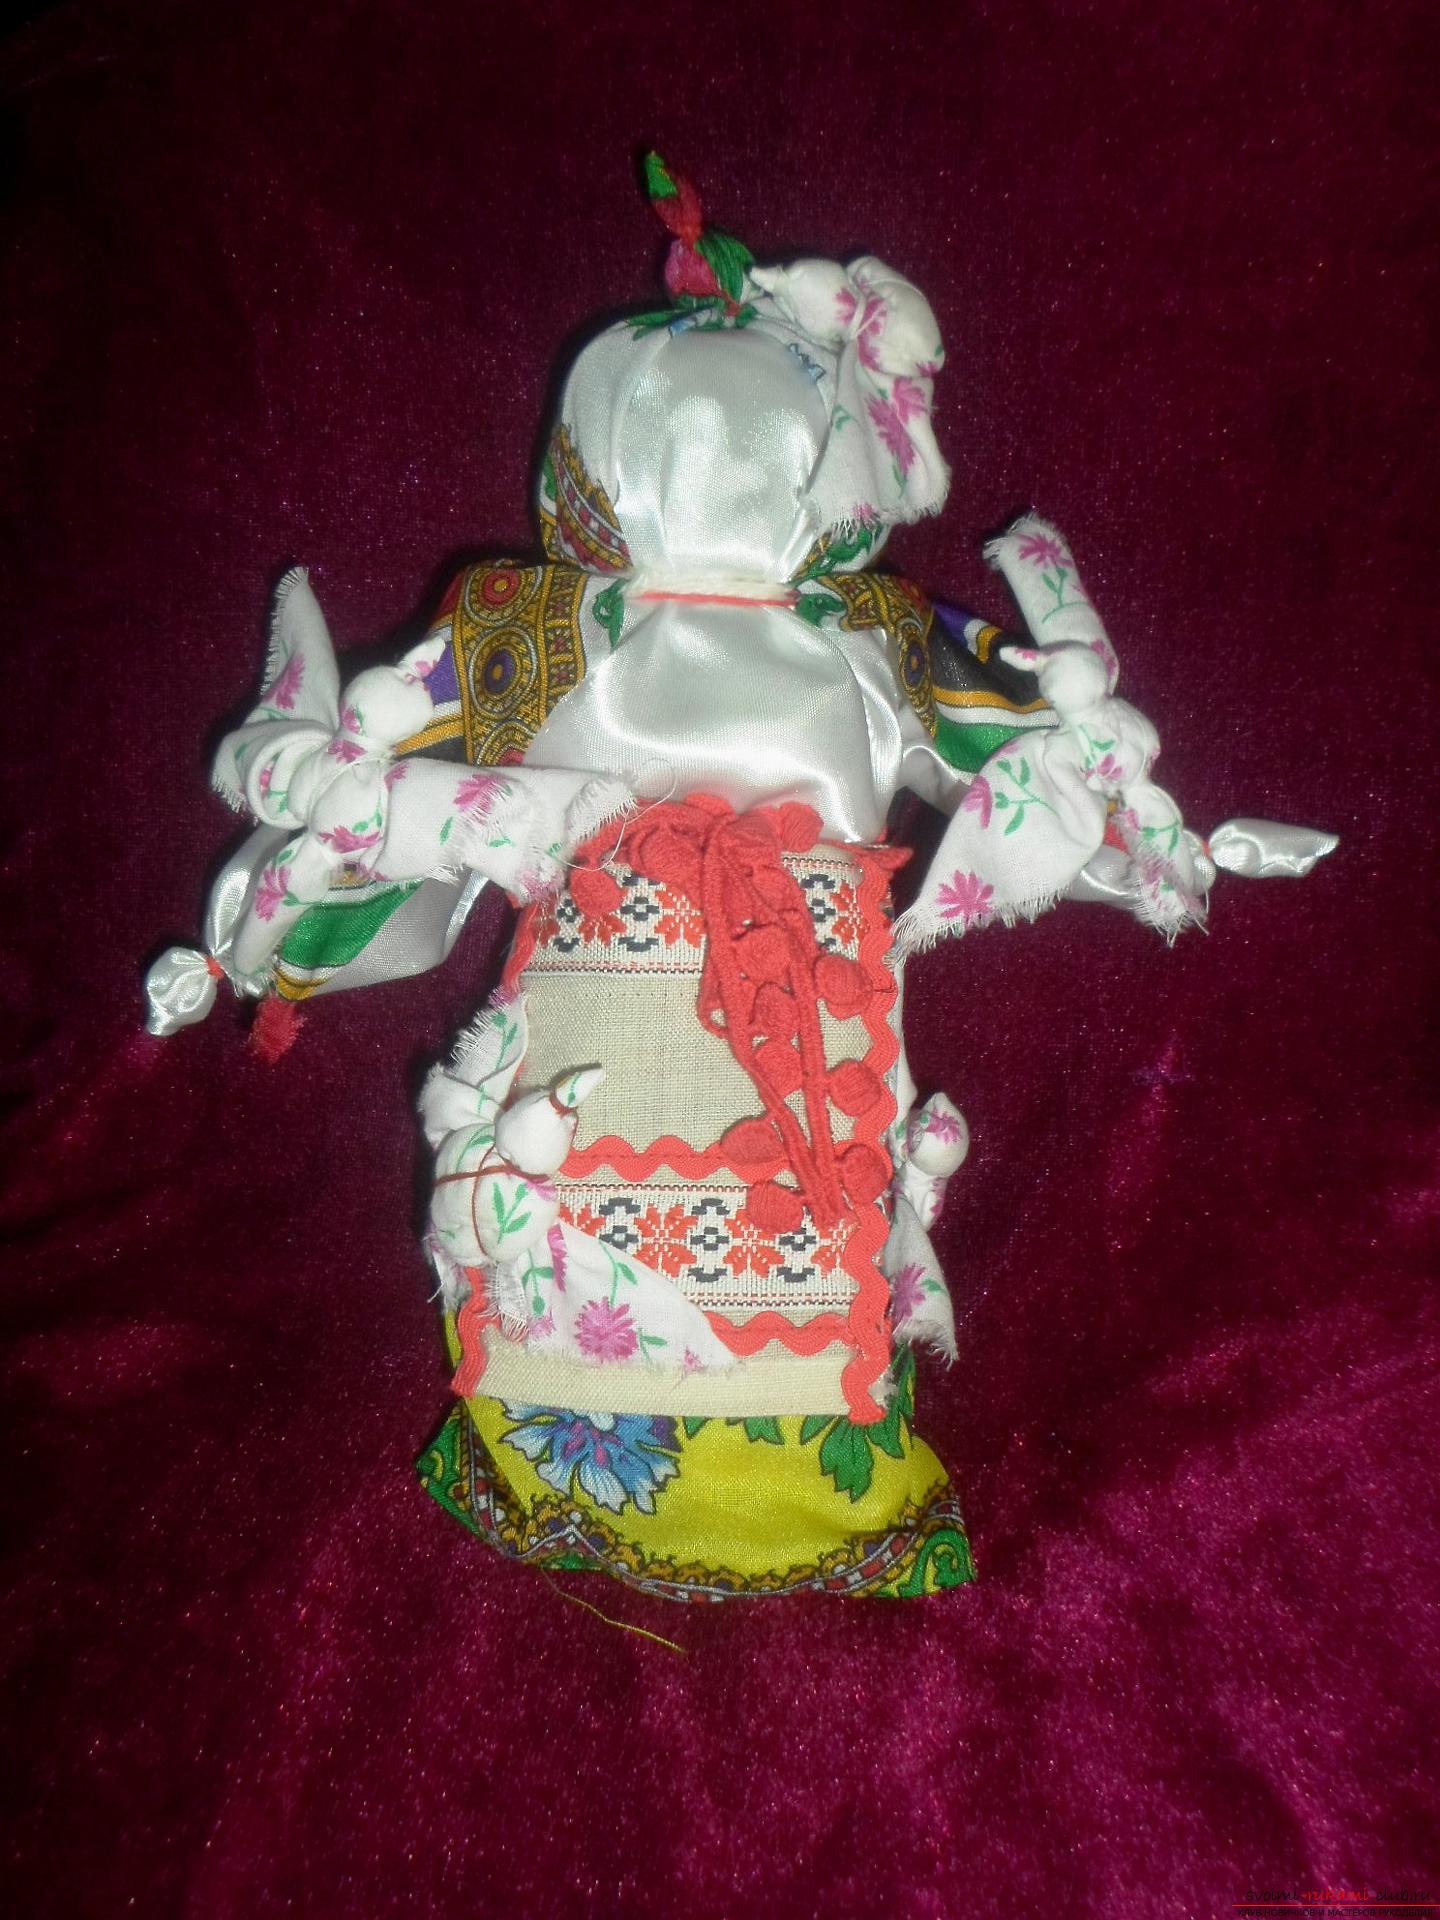 Slavic dolls, amulets for children's games and interior decorations in the Old Russian style. Picture №3